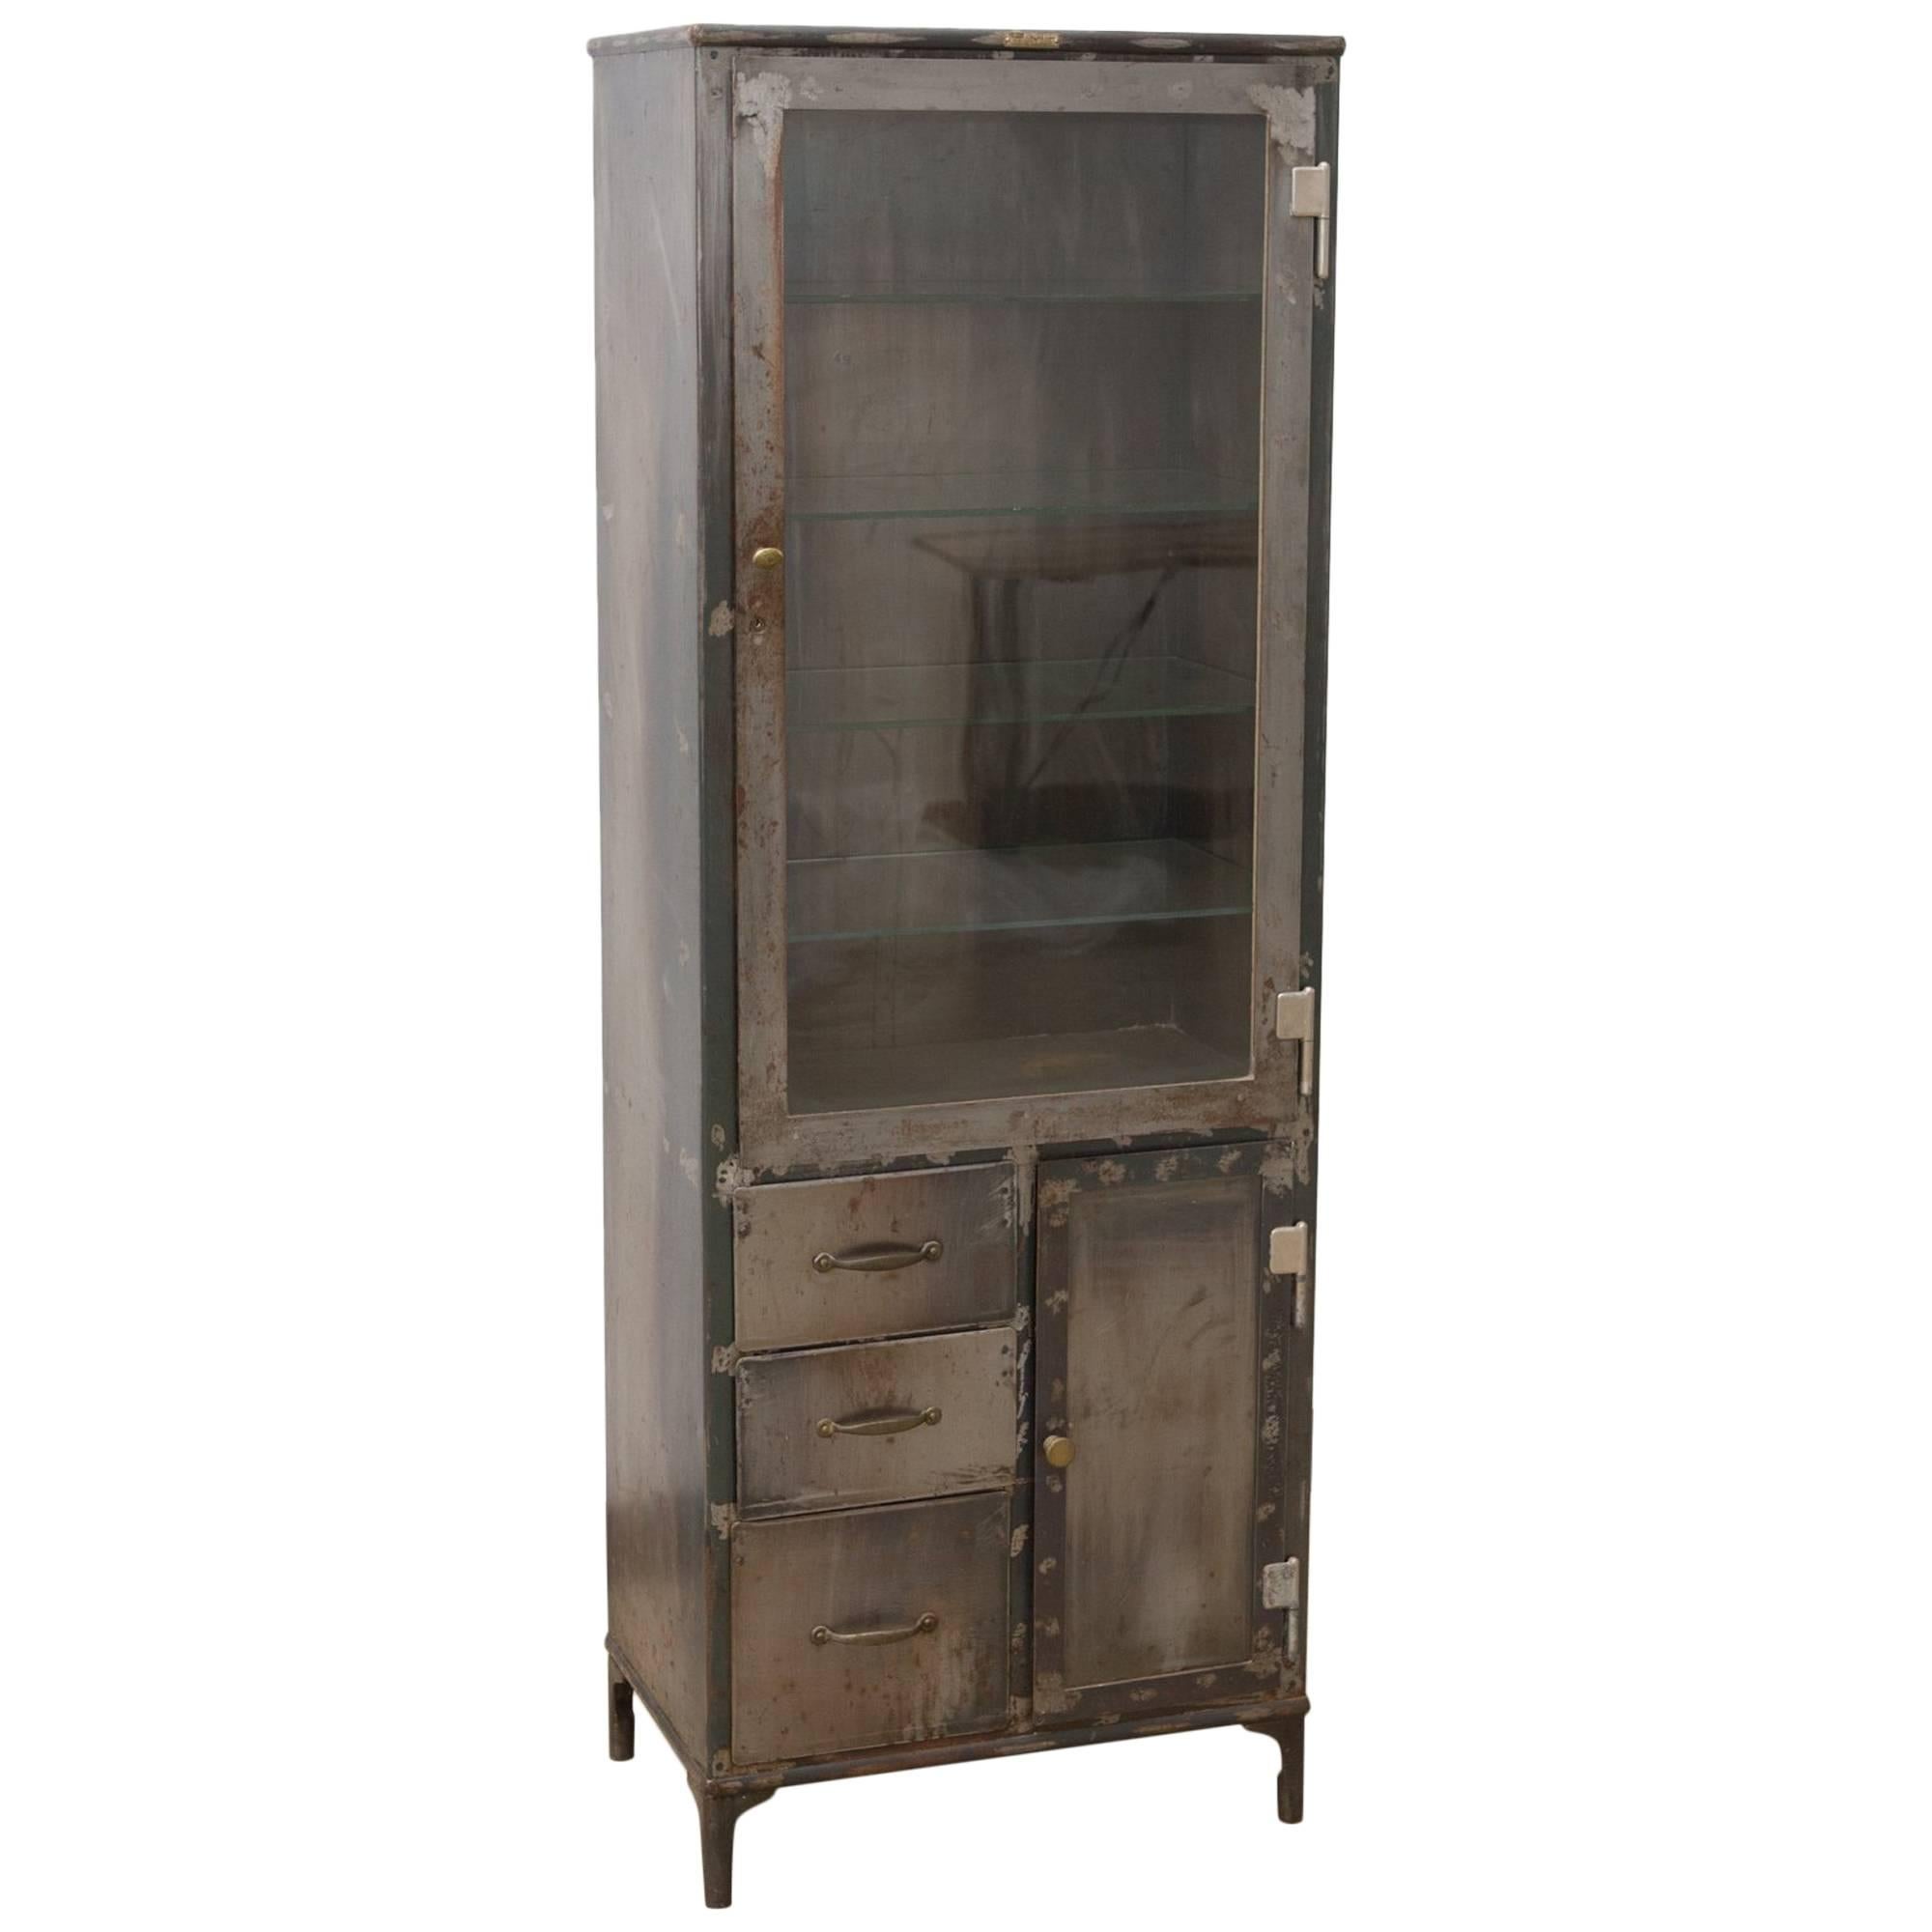 1940s U.S. Metal Medical Cabinet with Glass Shelves